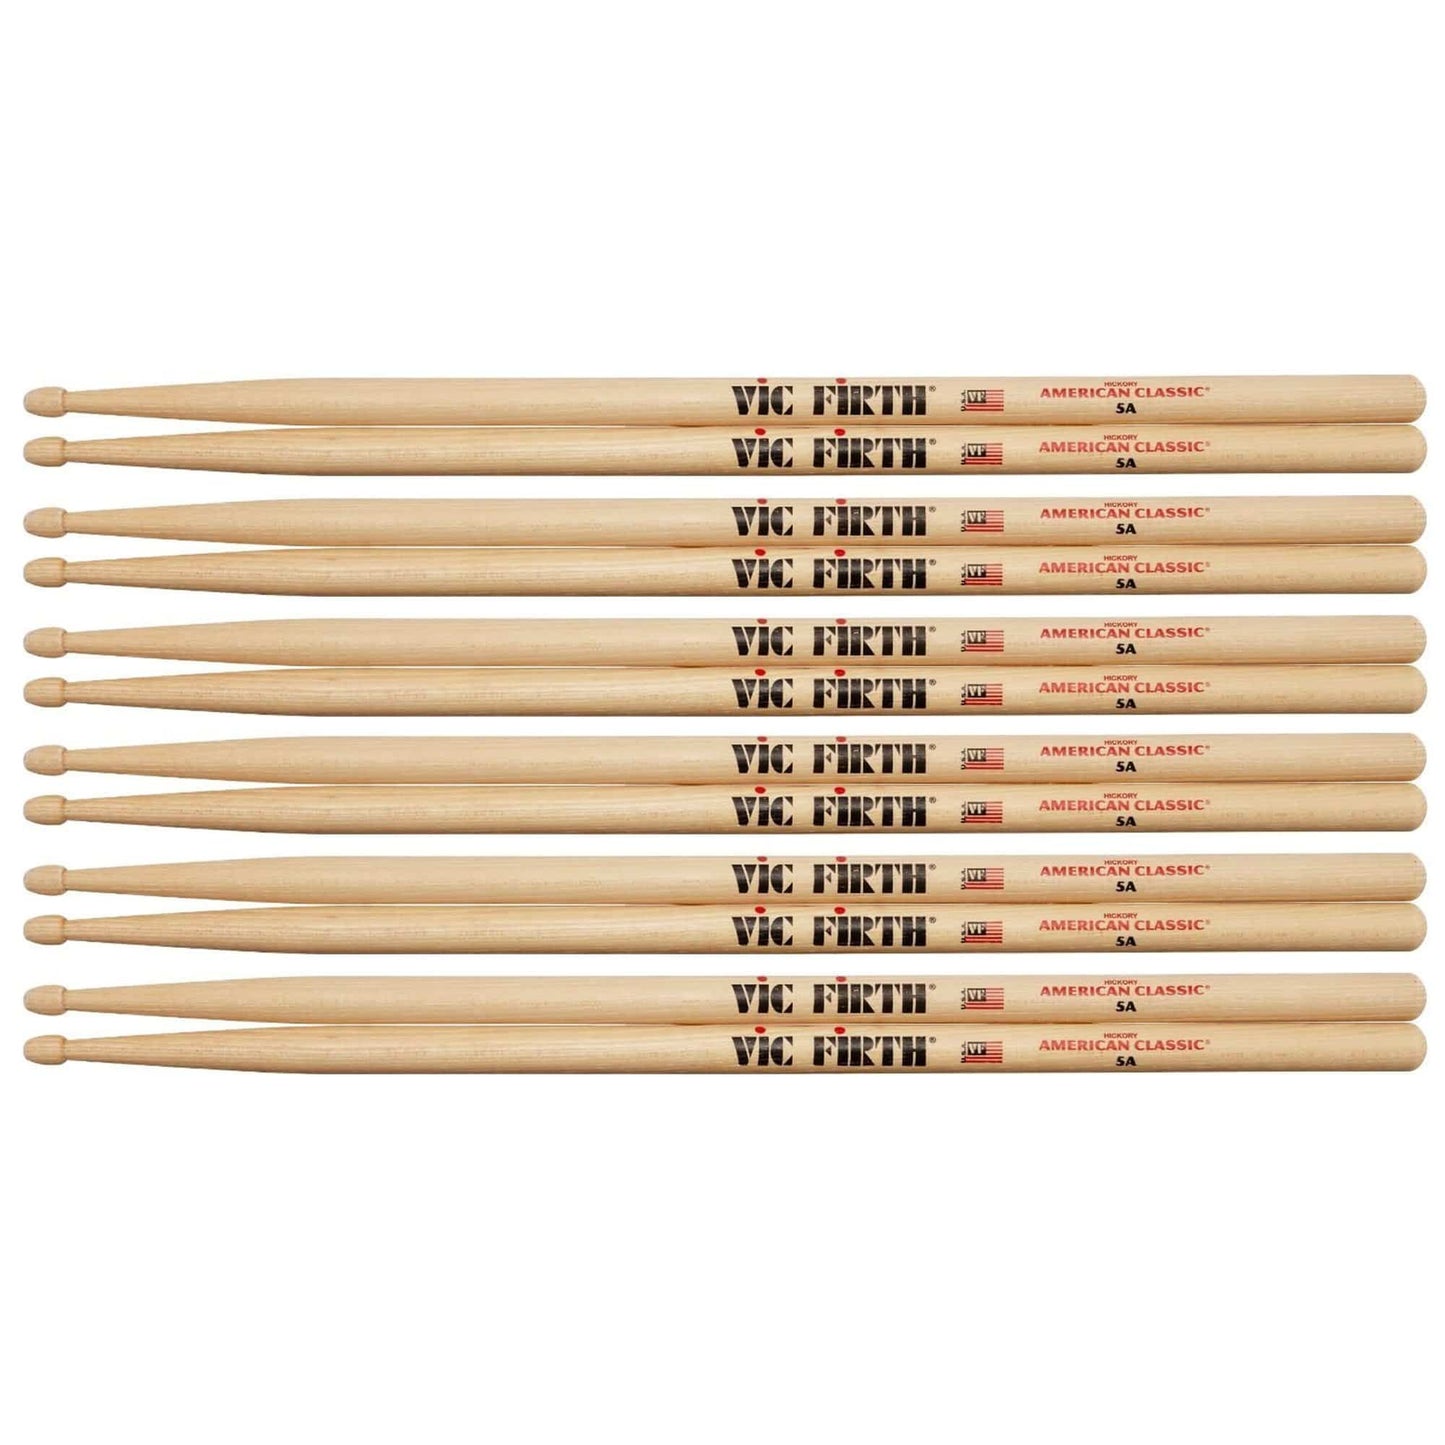 Vic Firth 5A Wood Tip Drum Sticks (6 Pair Bundle) Drums and Percussion / Parts and Accessories / Drum Sticks and Mallets